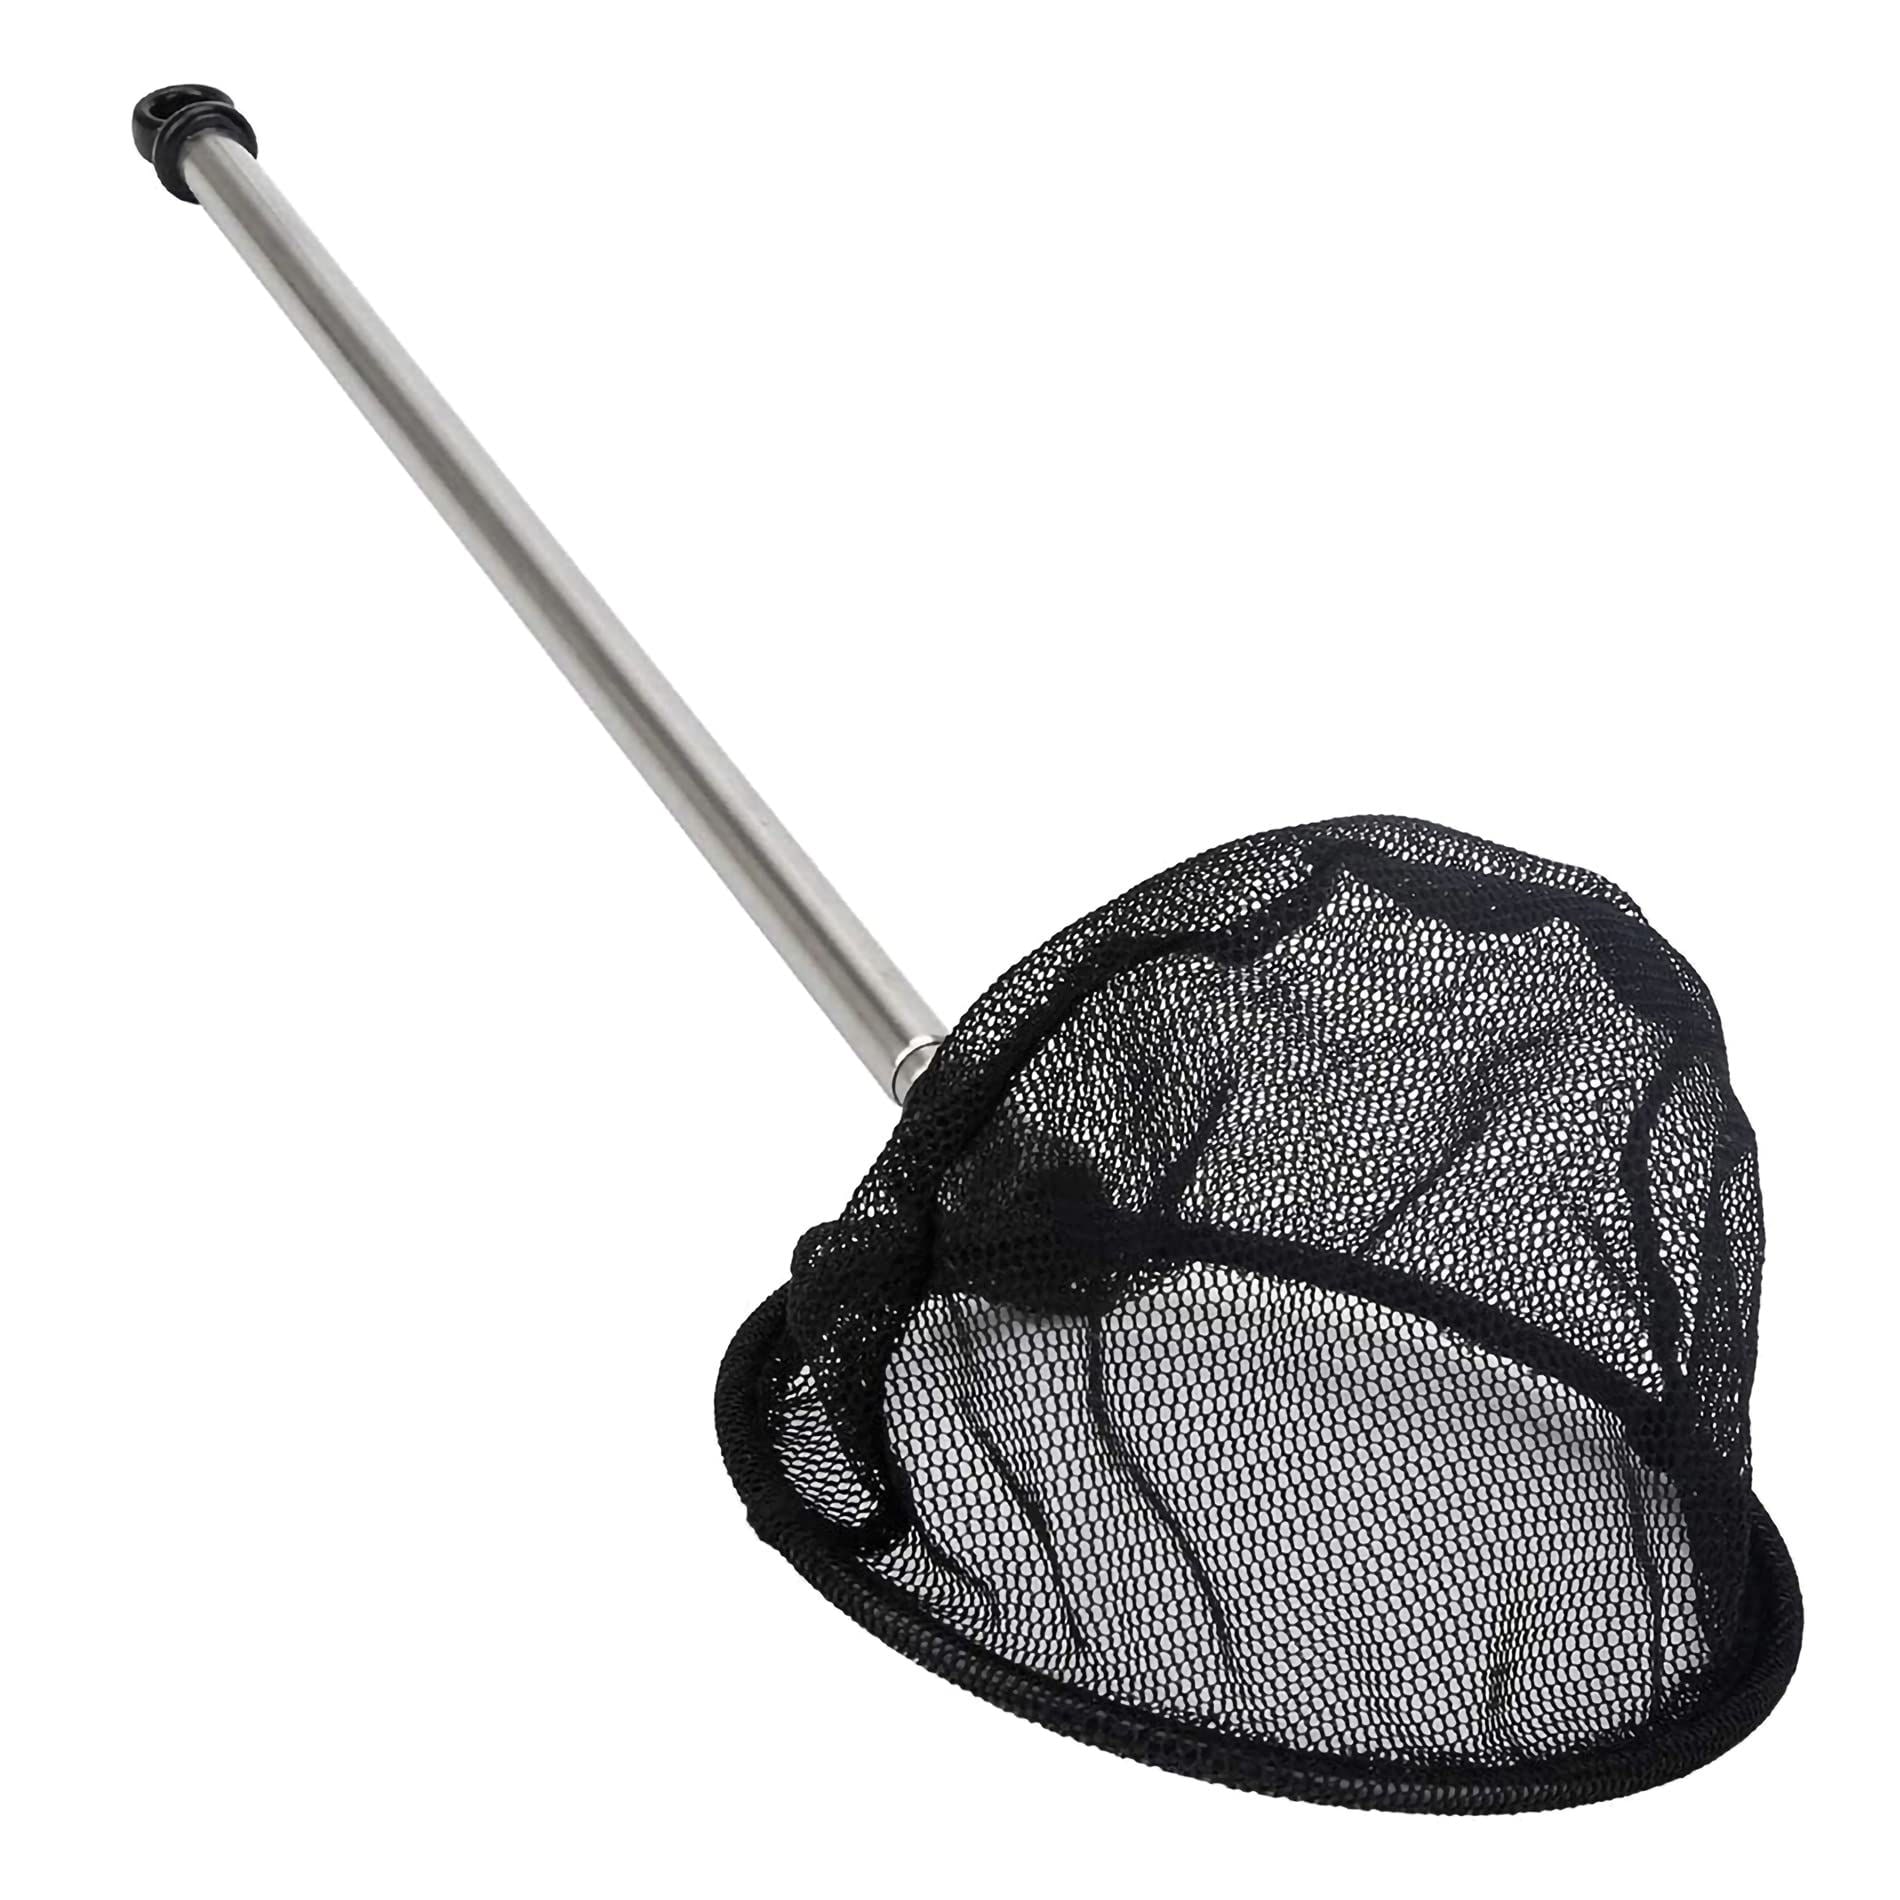 https://assets.dragonmart.ae//pictures/0749201_stainless-steel-fine-round-mesh-net-with-extendable-long-handle-49-165-inch.jpeg